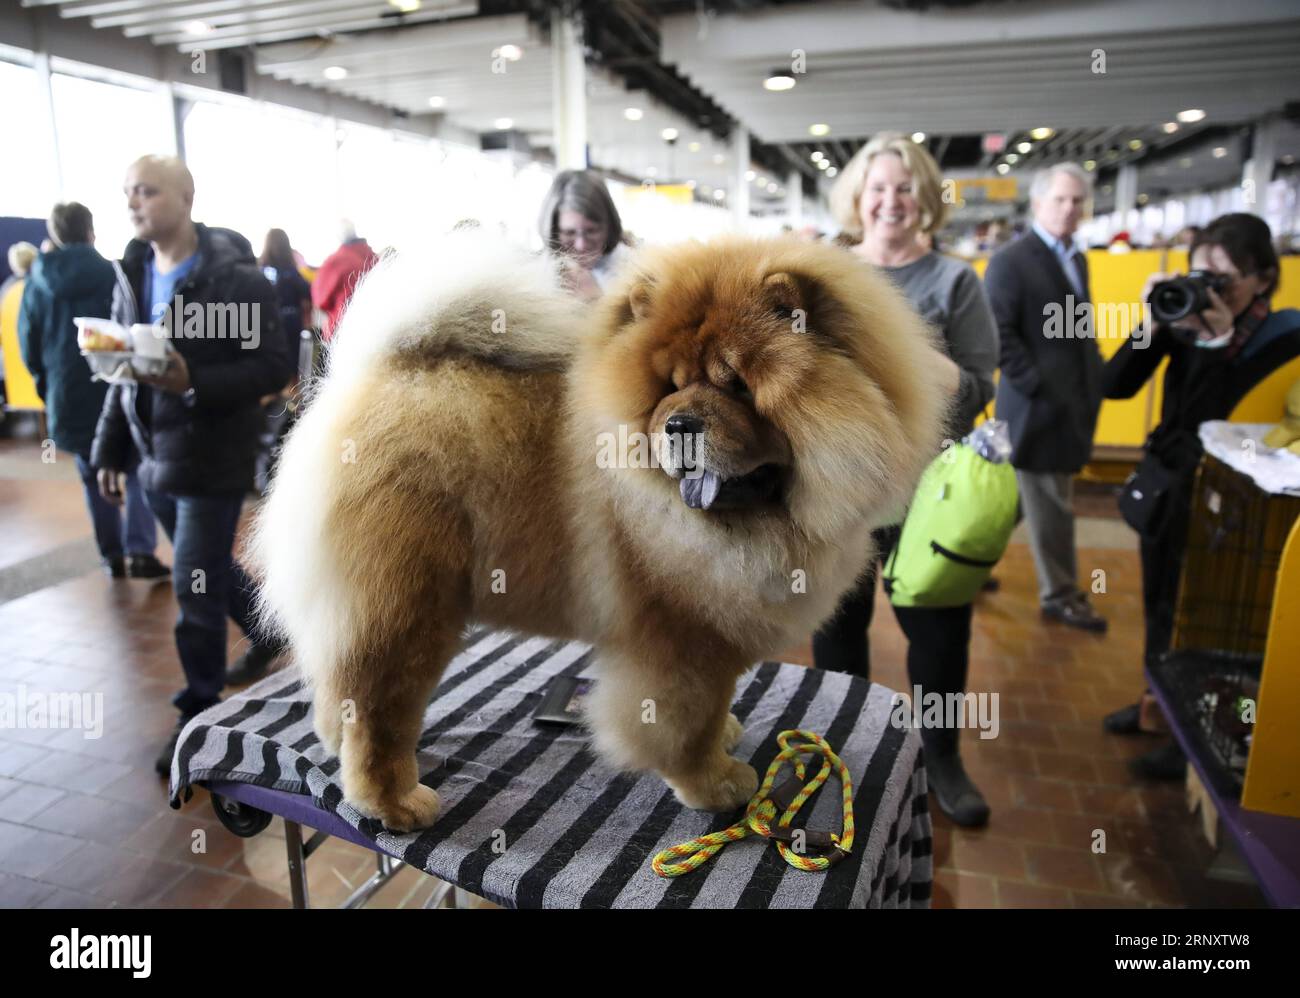 (180213) -- NEW YORK, Feb. 13, 2018 -- A Chow Chow is seen during the 2018 Westminster Kennel Club Dog Show in New York, the United States, Feb. 12, 2018. Around 2800 dogs of over 200 breeds from all over the world participated in the show this year. ) (zy) U.S.-NEW YORK-DOG SHOW WangxYing PUBLICATIONxNOTxINxCHN Stock Photo